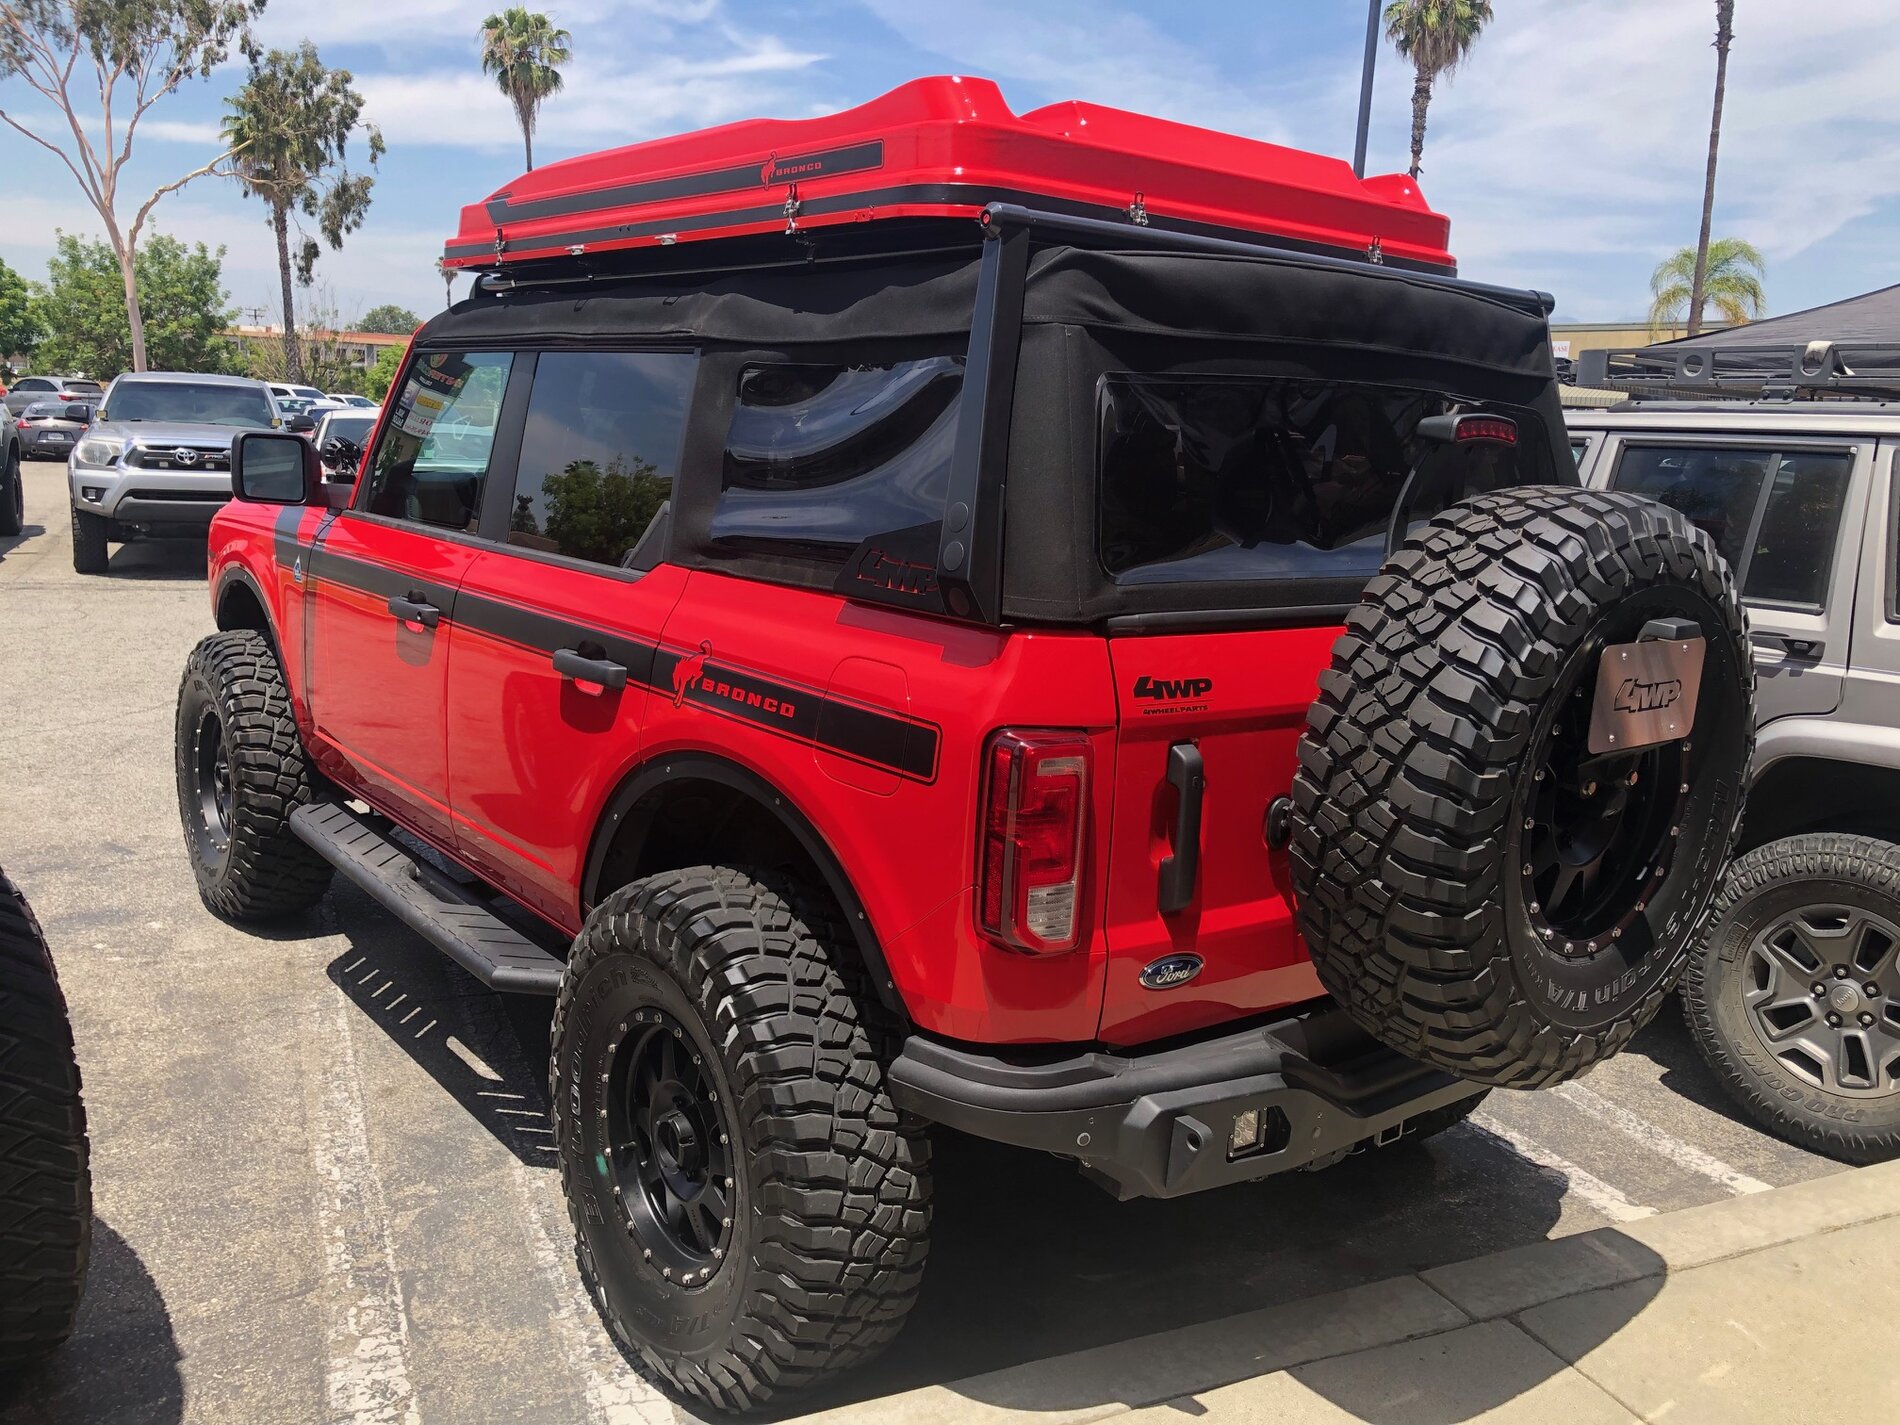 Ford Bronco 🔥🚨Update: Flash Display of the 4WPs Bronco: West Covina Noon to 2pm (Rest of locations in comments) 0BD79A71-B1FD-4391-B1E1-13CD36AA2AD5